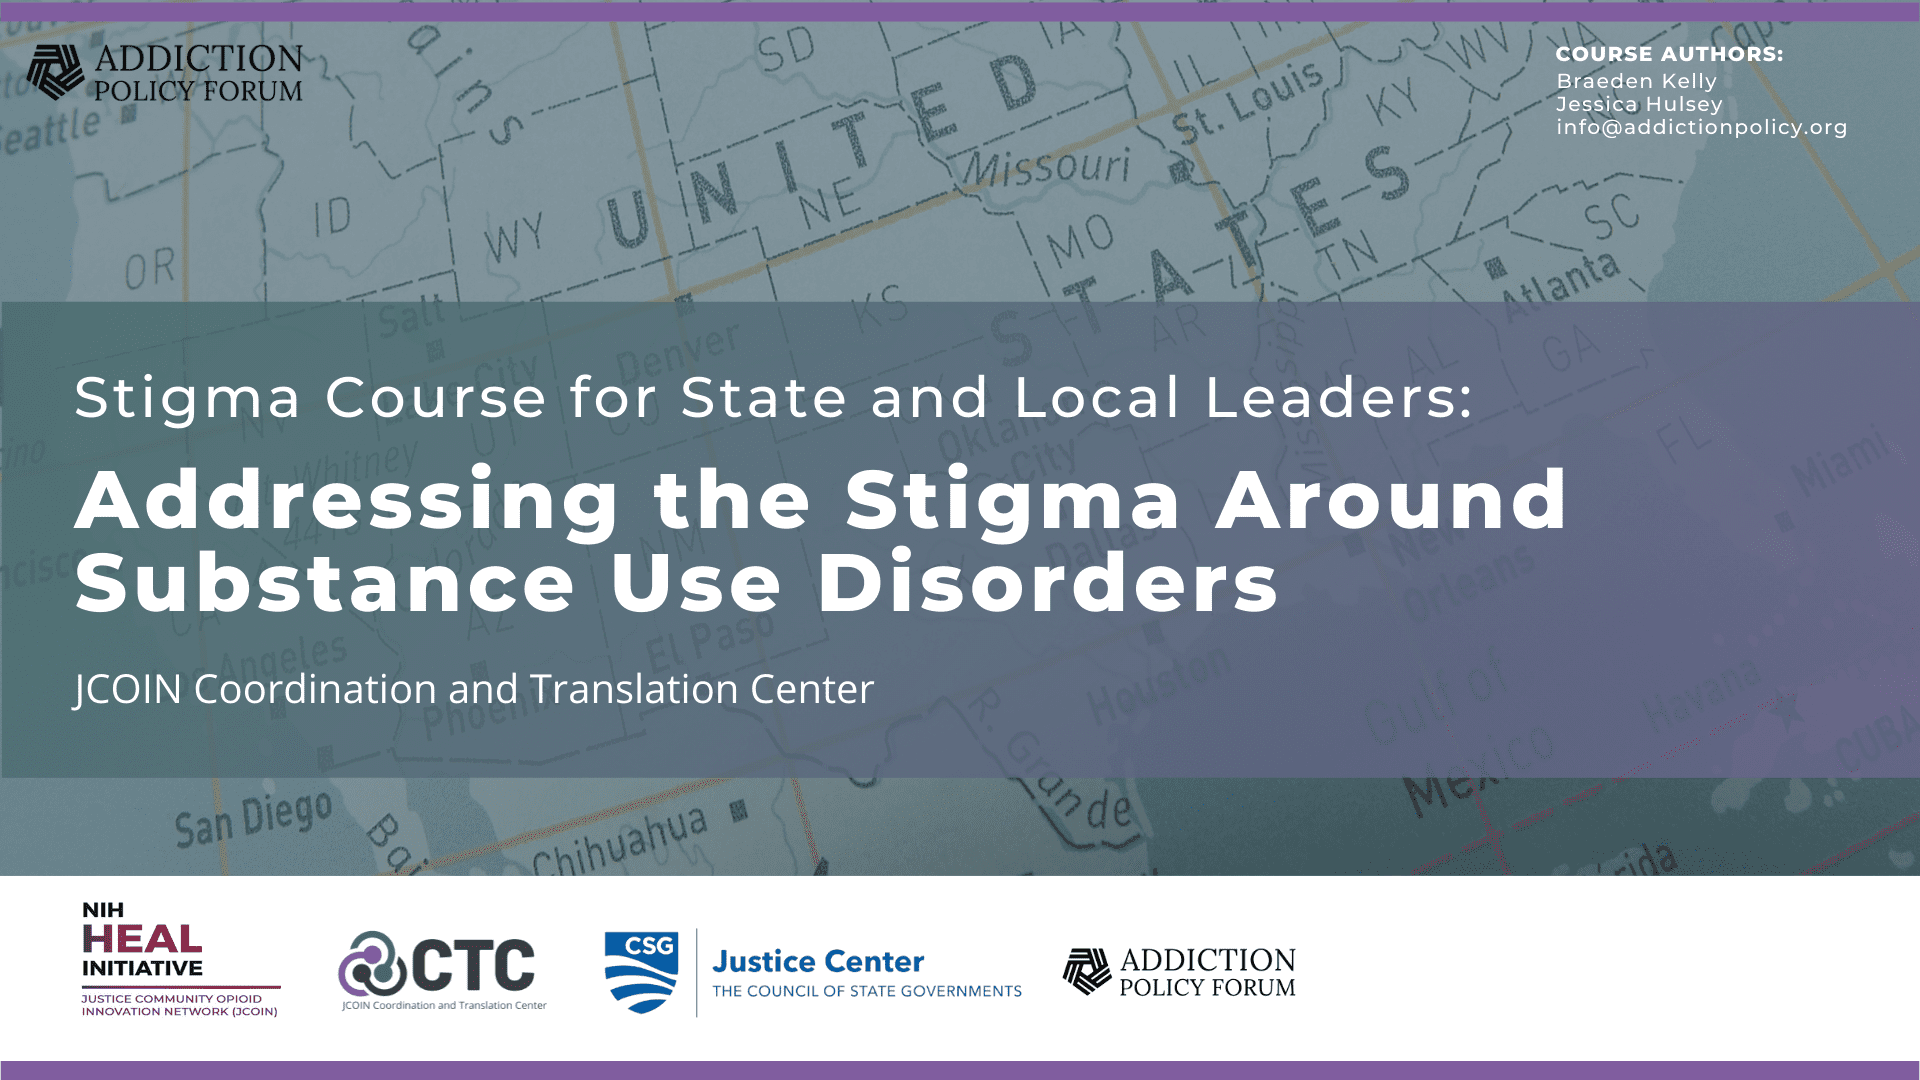 Stigma Course for State and Local Leaders: Addressing the Stigma around Substance Use Disorders